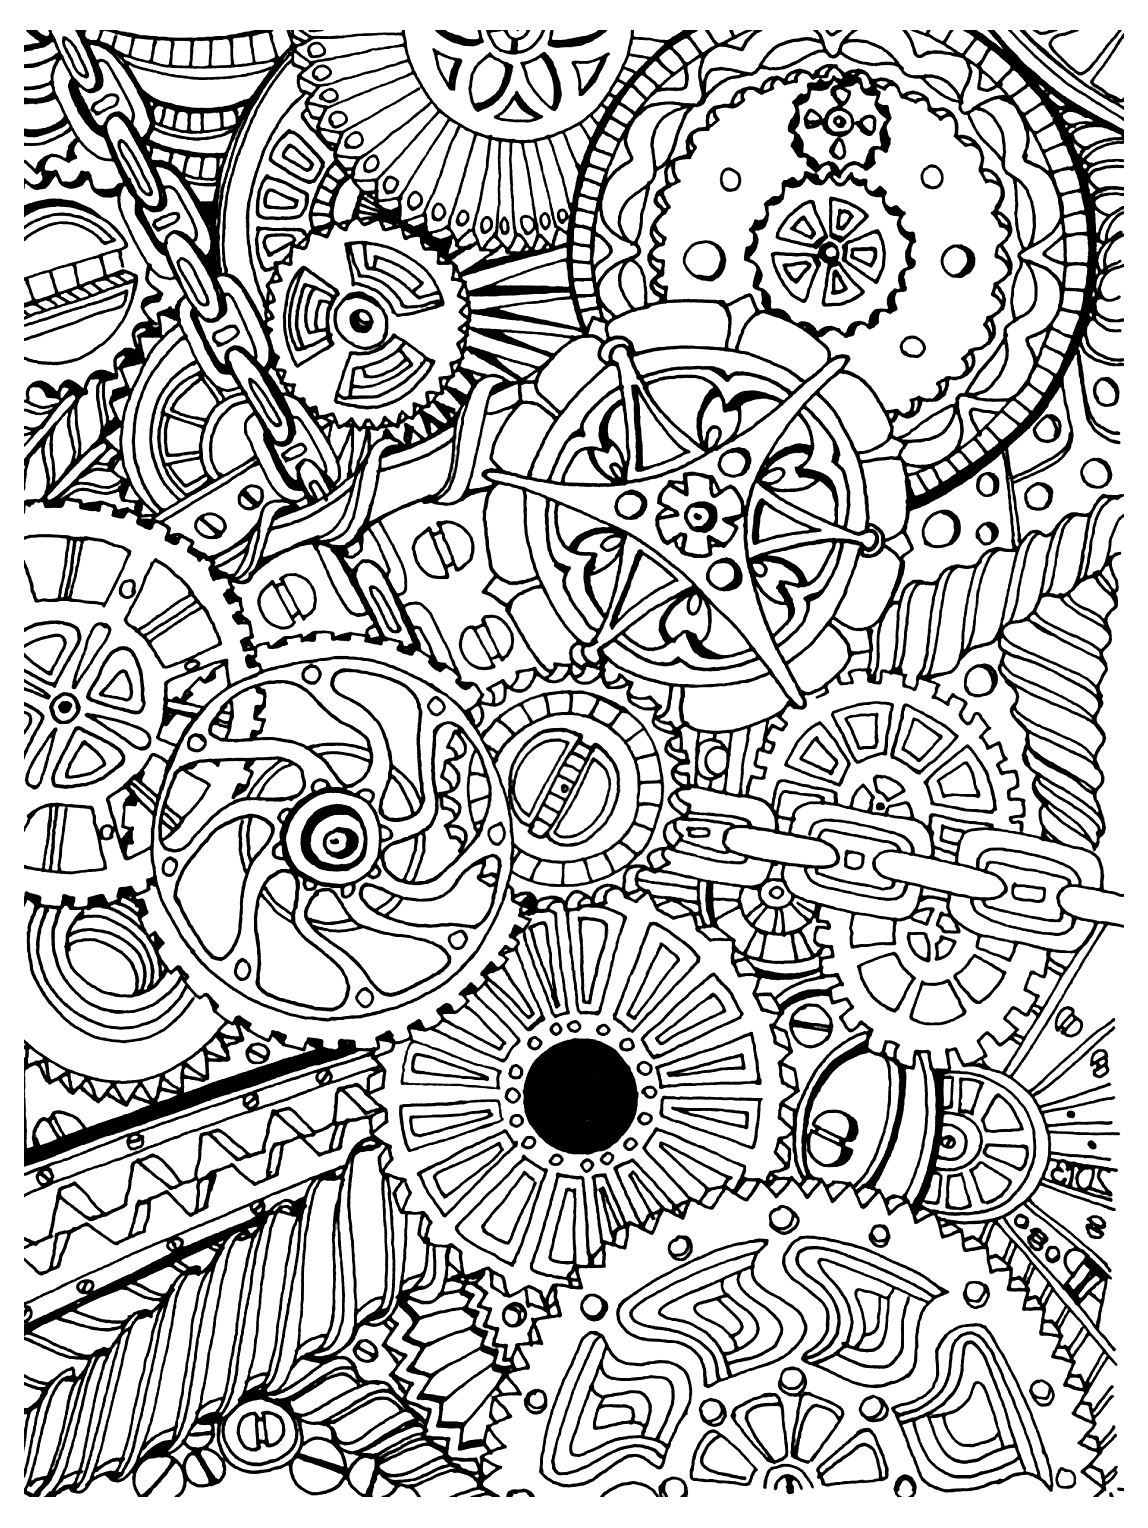 20 Printable Stress Relief Coloring Pages for Adults   Happier Human